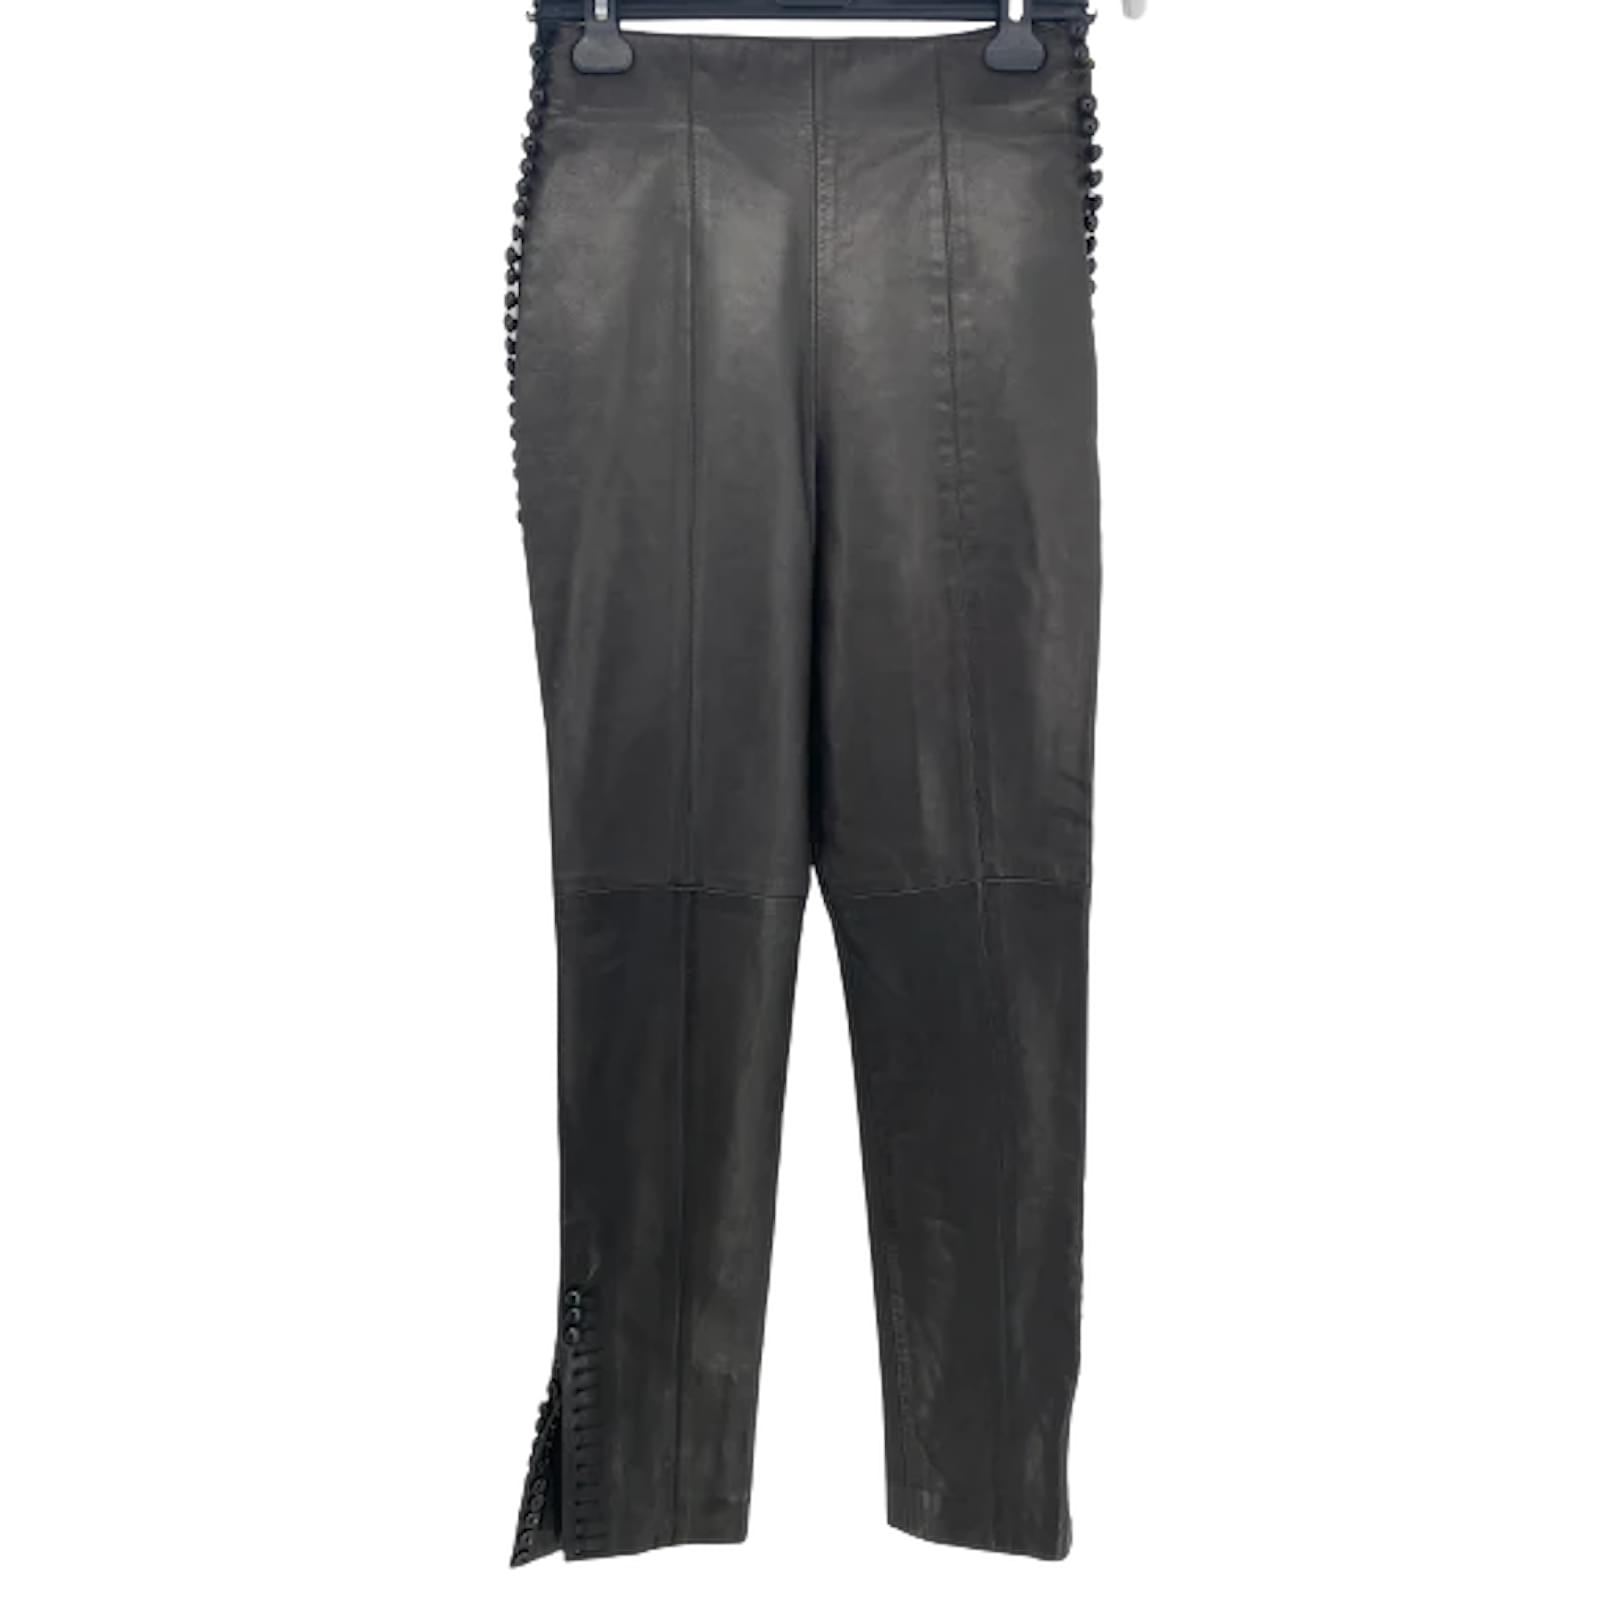 Bermuda shorts Christian Dior SE Pants graphy, Andrea, white, active  Shorts, trousers png | PNGWing